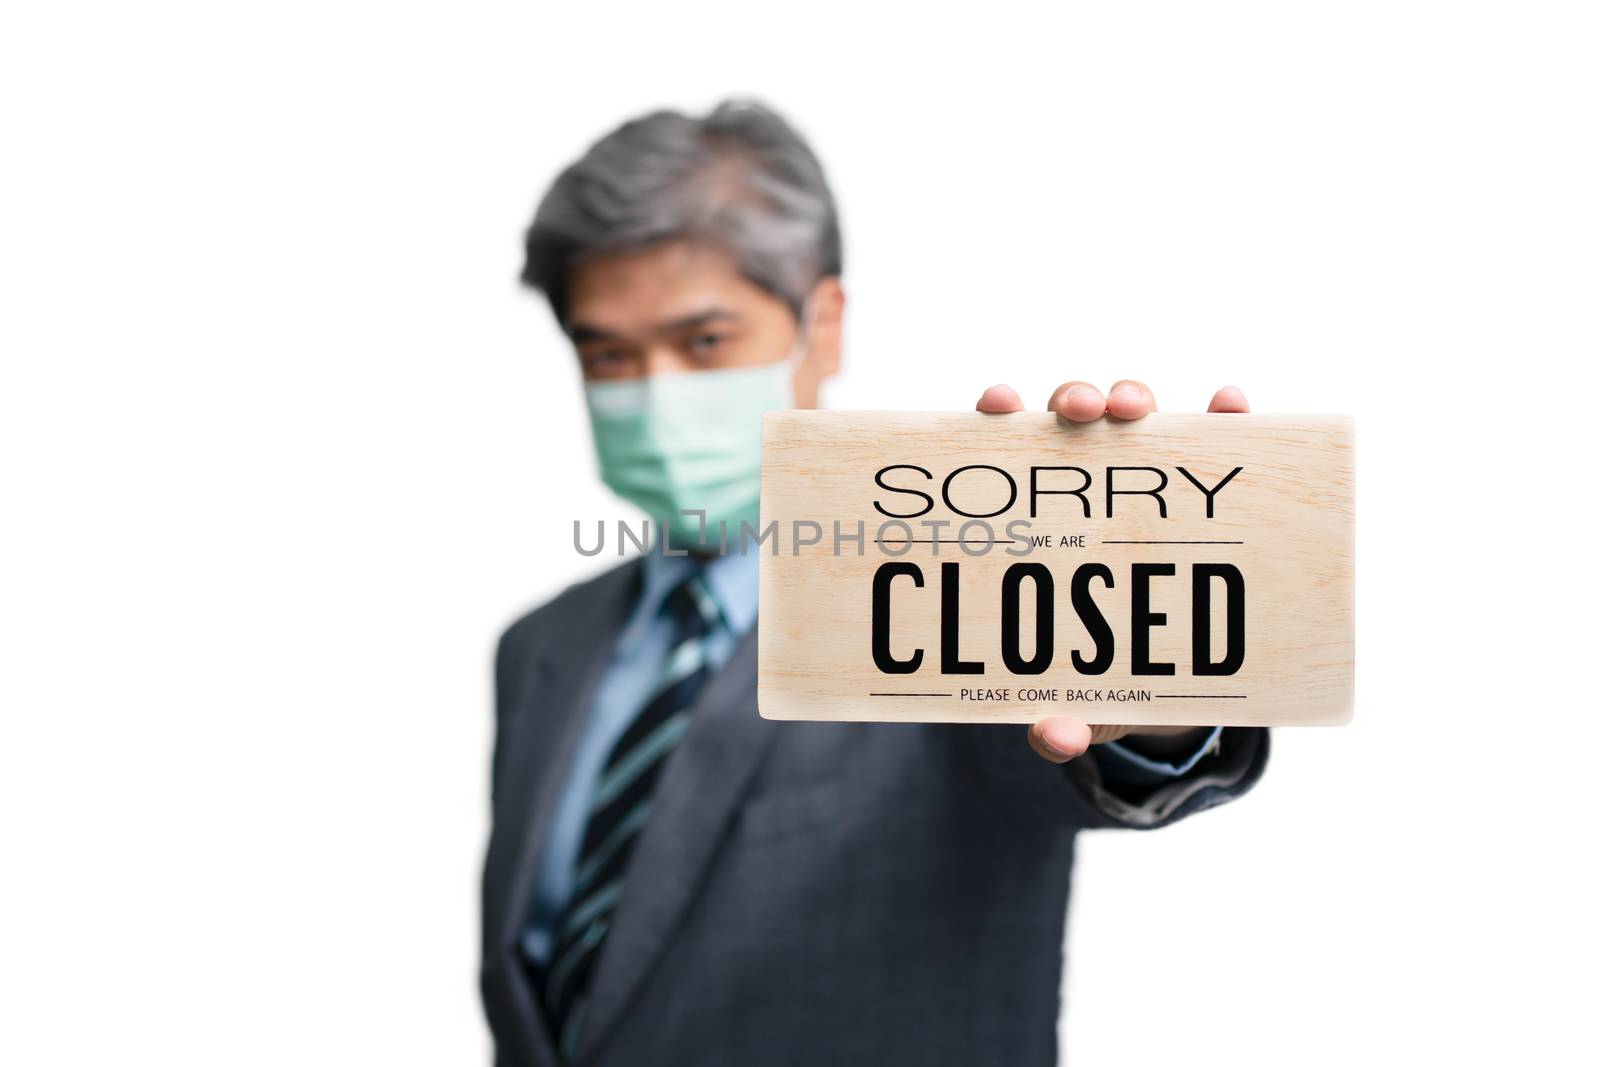 Businessmen wear medical masks on the isolated background and holding sorry we are closed sign. Concept of businesses and shops have to close because of a virus epidemic and quarantine